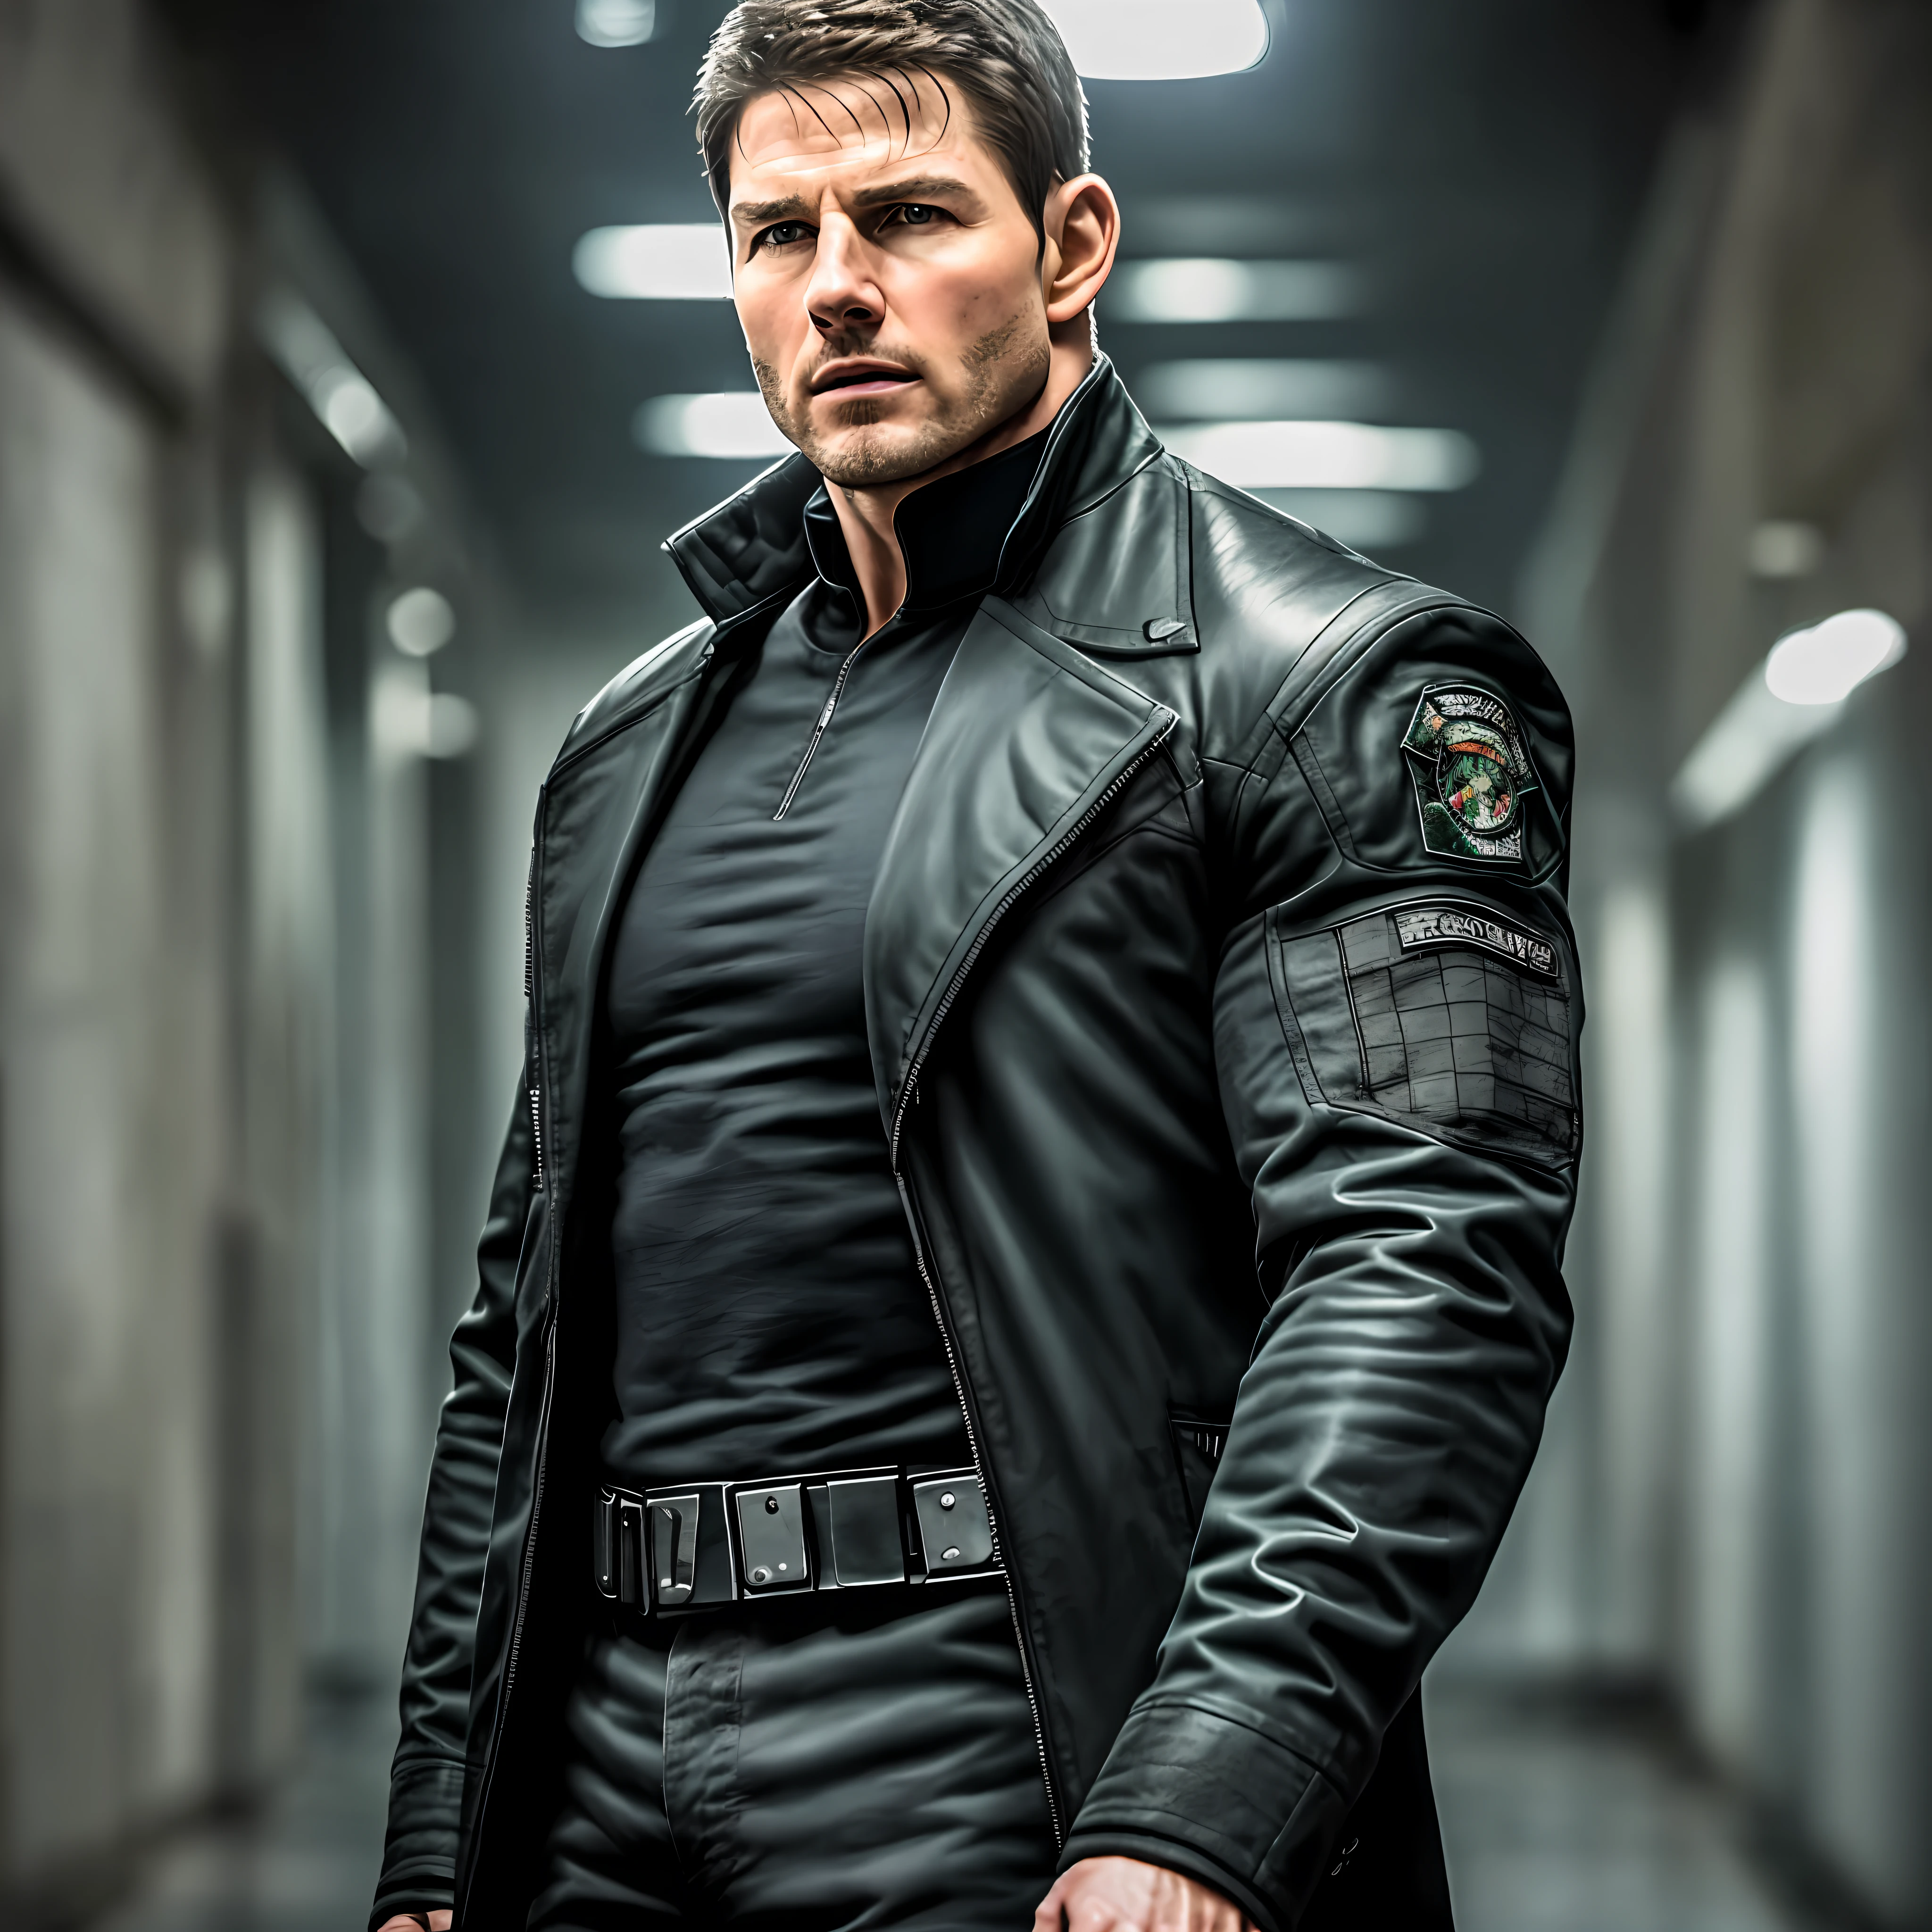 Chris Redfield if he was played by Tom Cruise in live action, wearing black long sleeves, black coat, tall and hunk, best quality, masterpiece, high resolution, soft lighting, dark gloomy hallway in the background, detailed face, super realistic, center focus